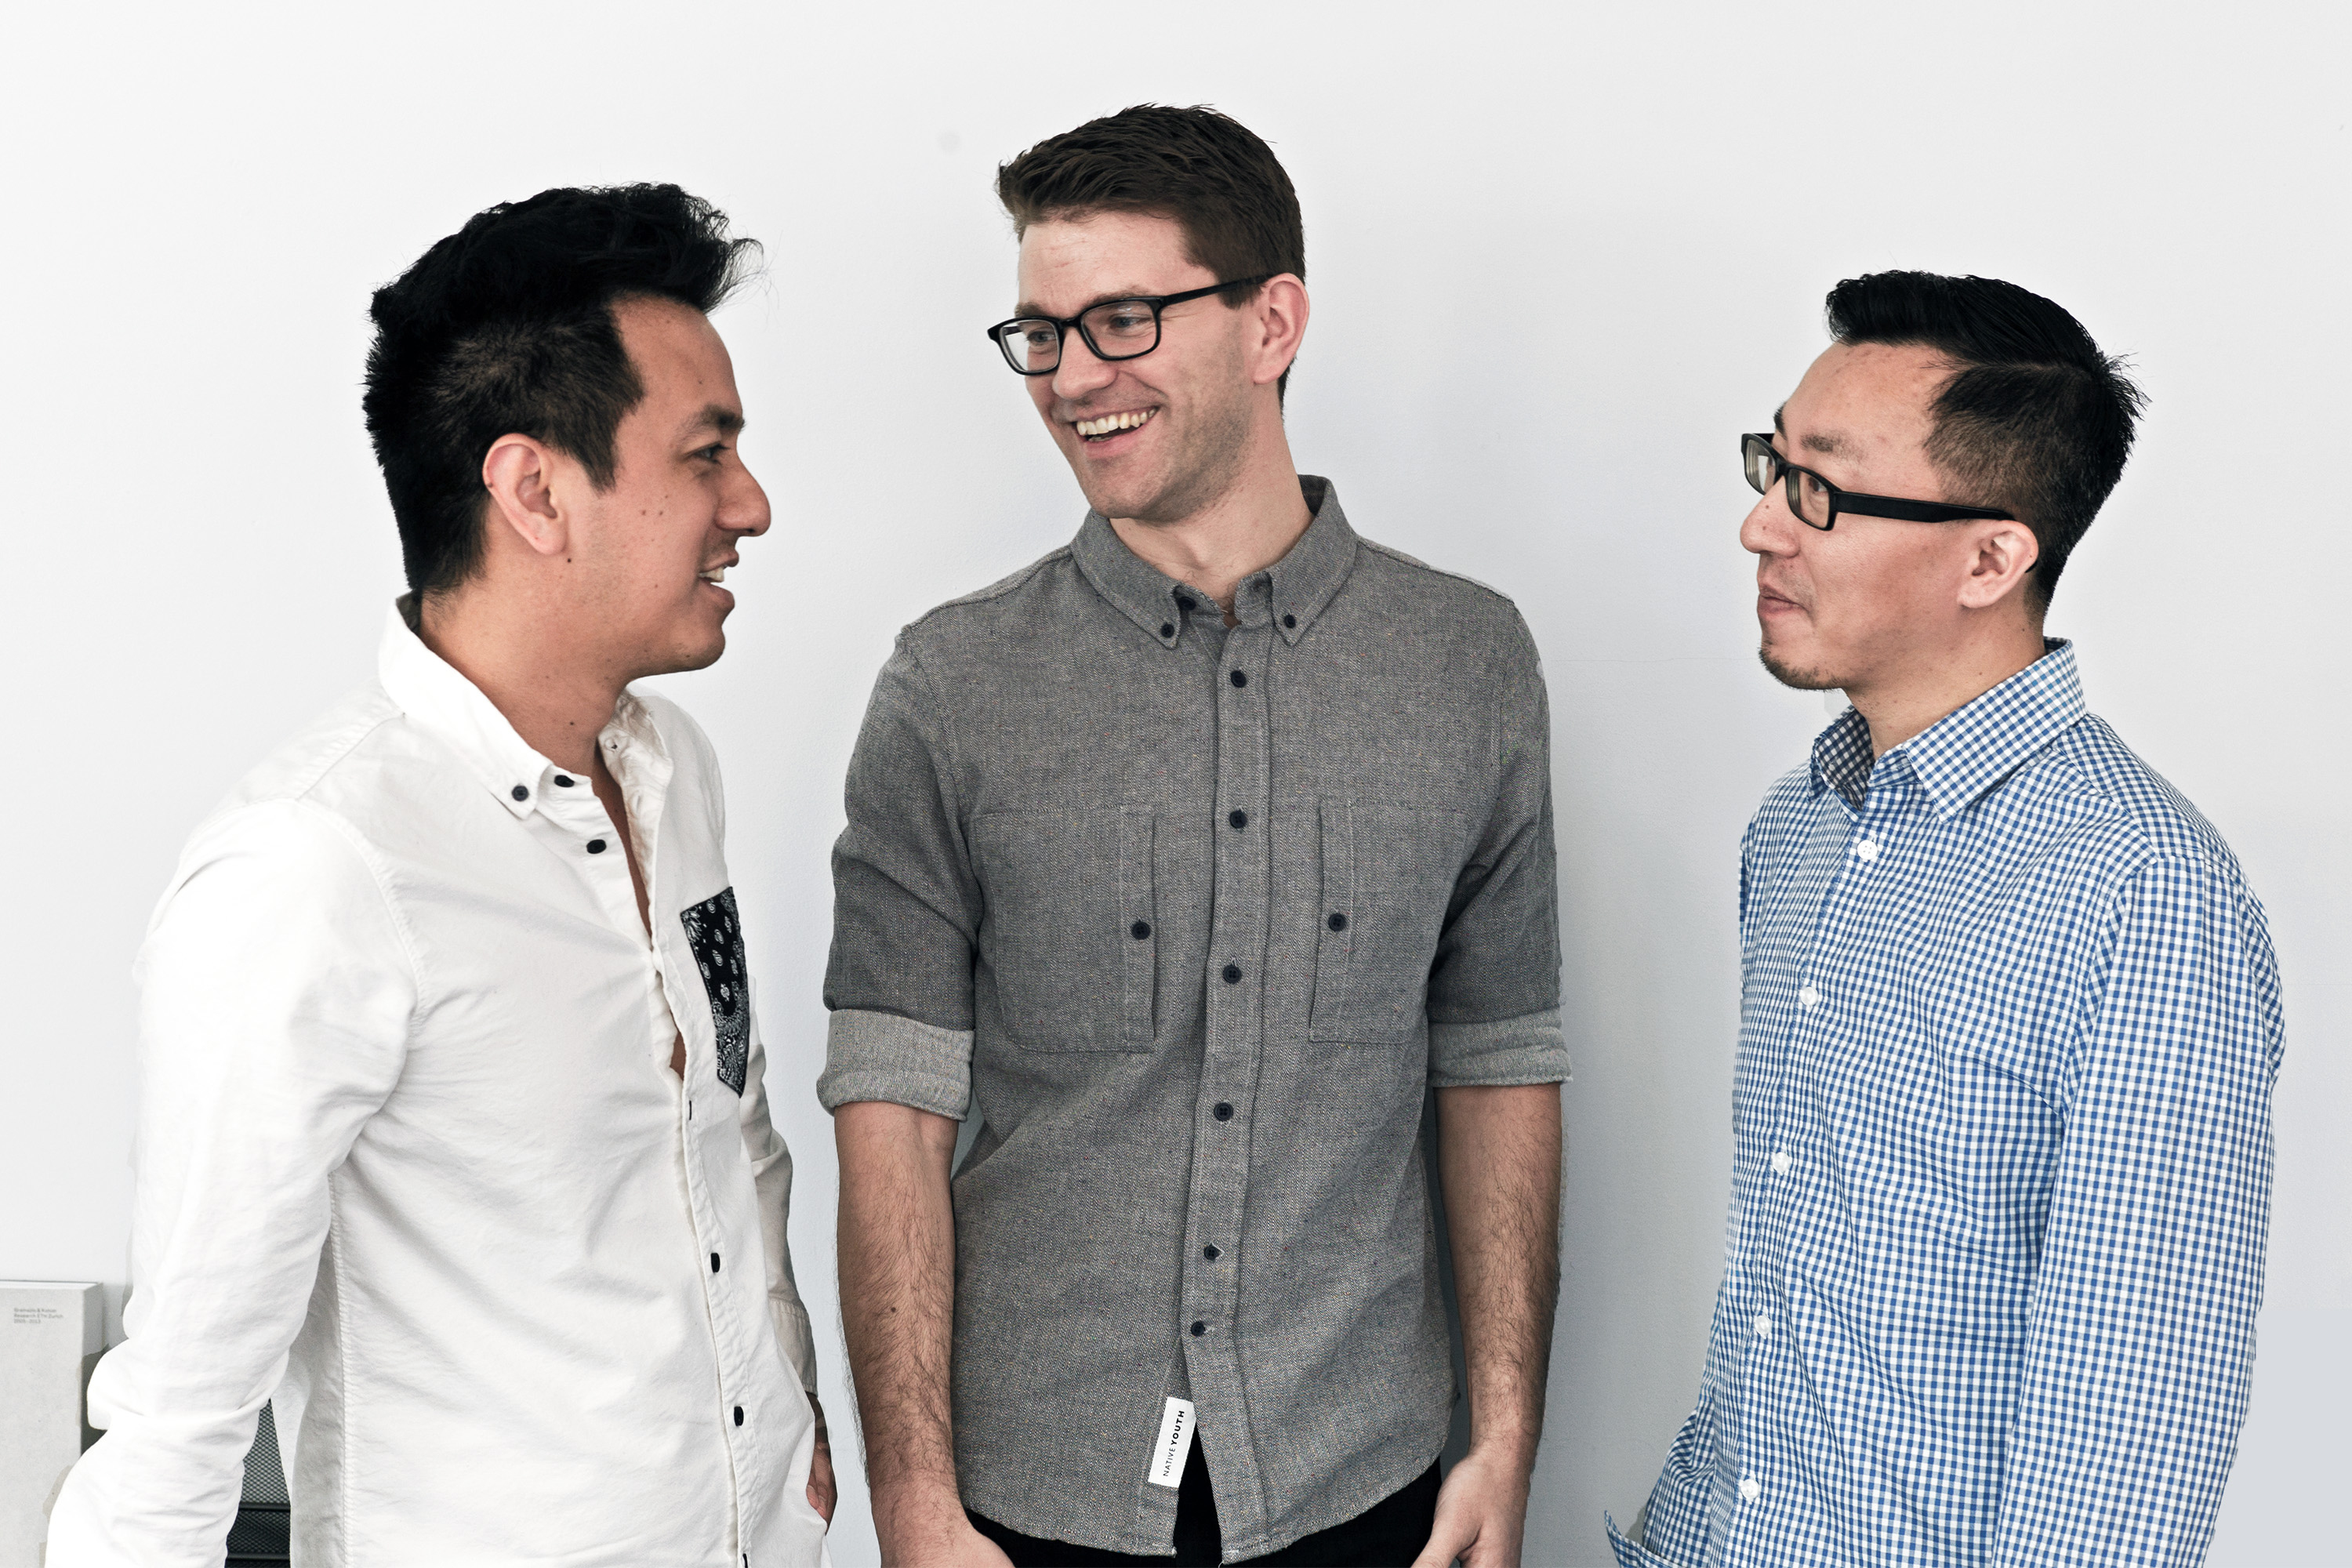 From left to right, Monograph co-founders Moe Amaya MA ’14, Alex Dixon MA ’14, and Robert Yuen.